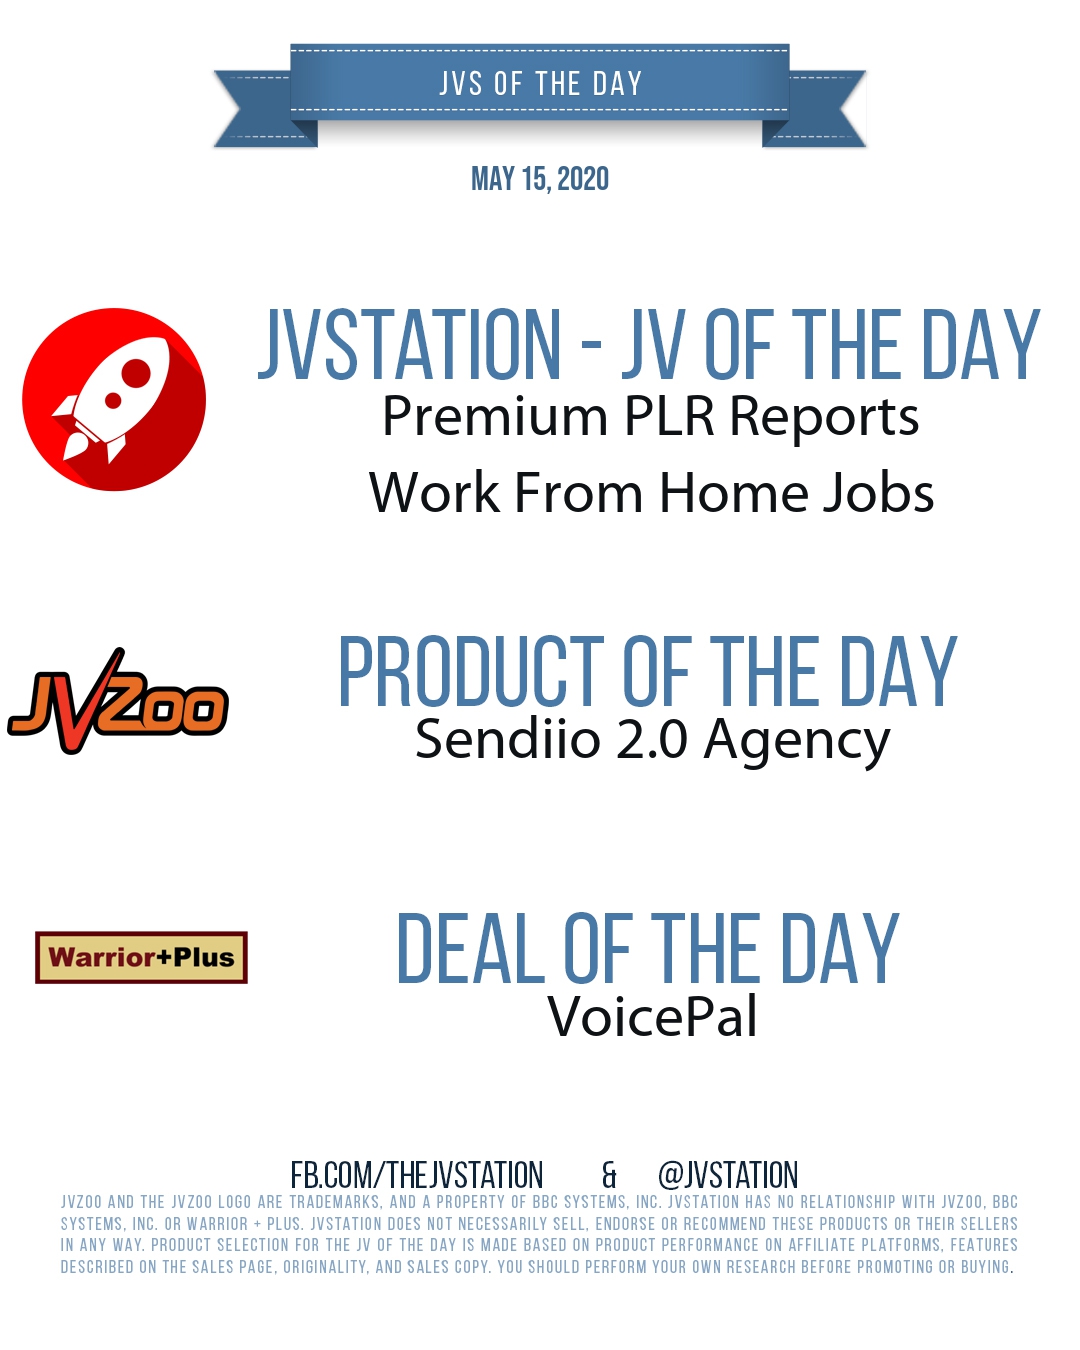 JVs of the day - May 15, 2020